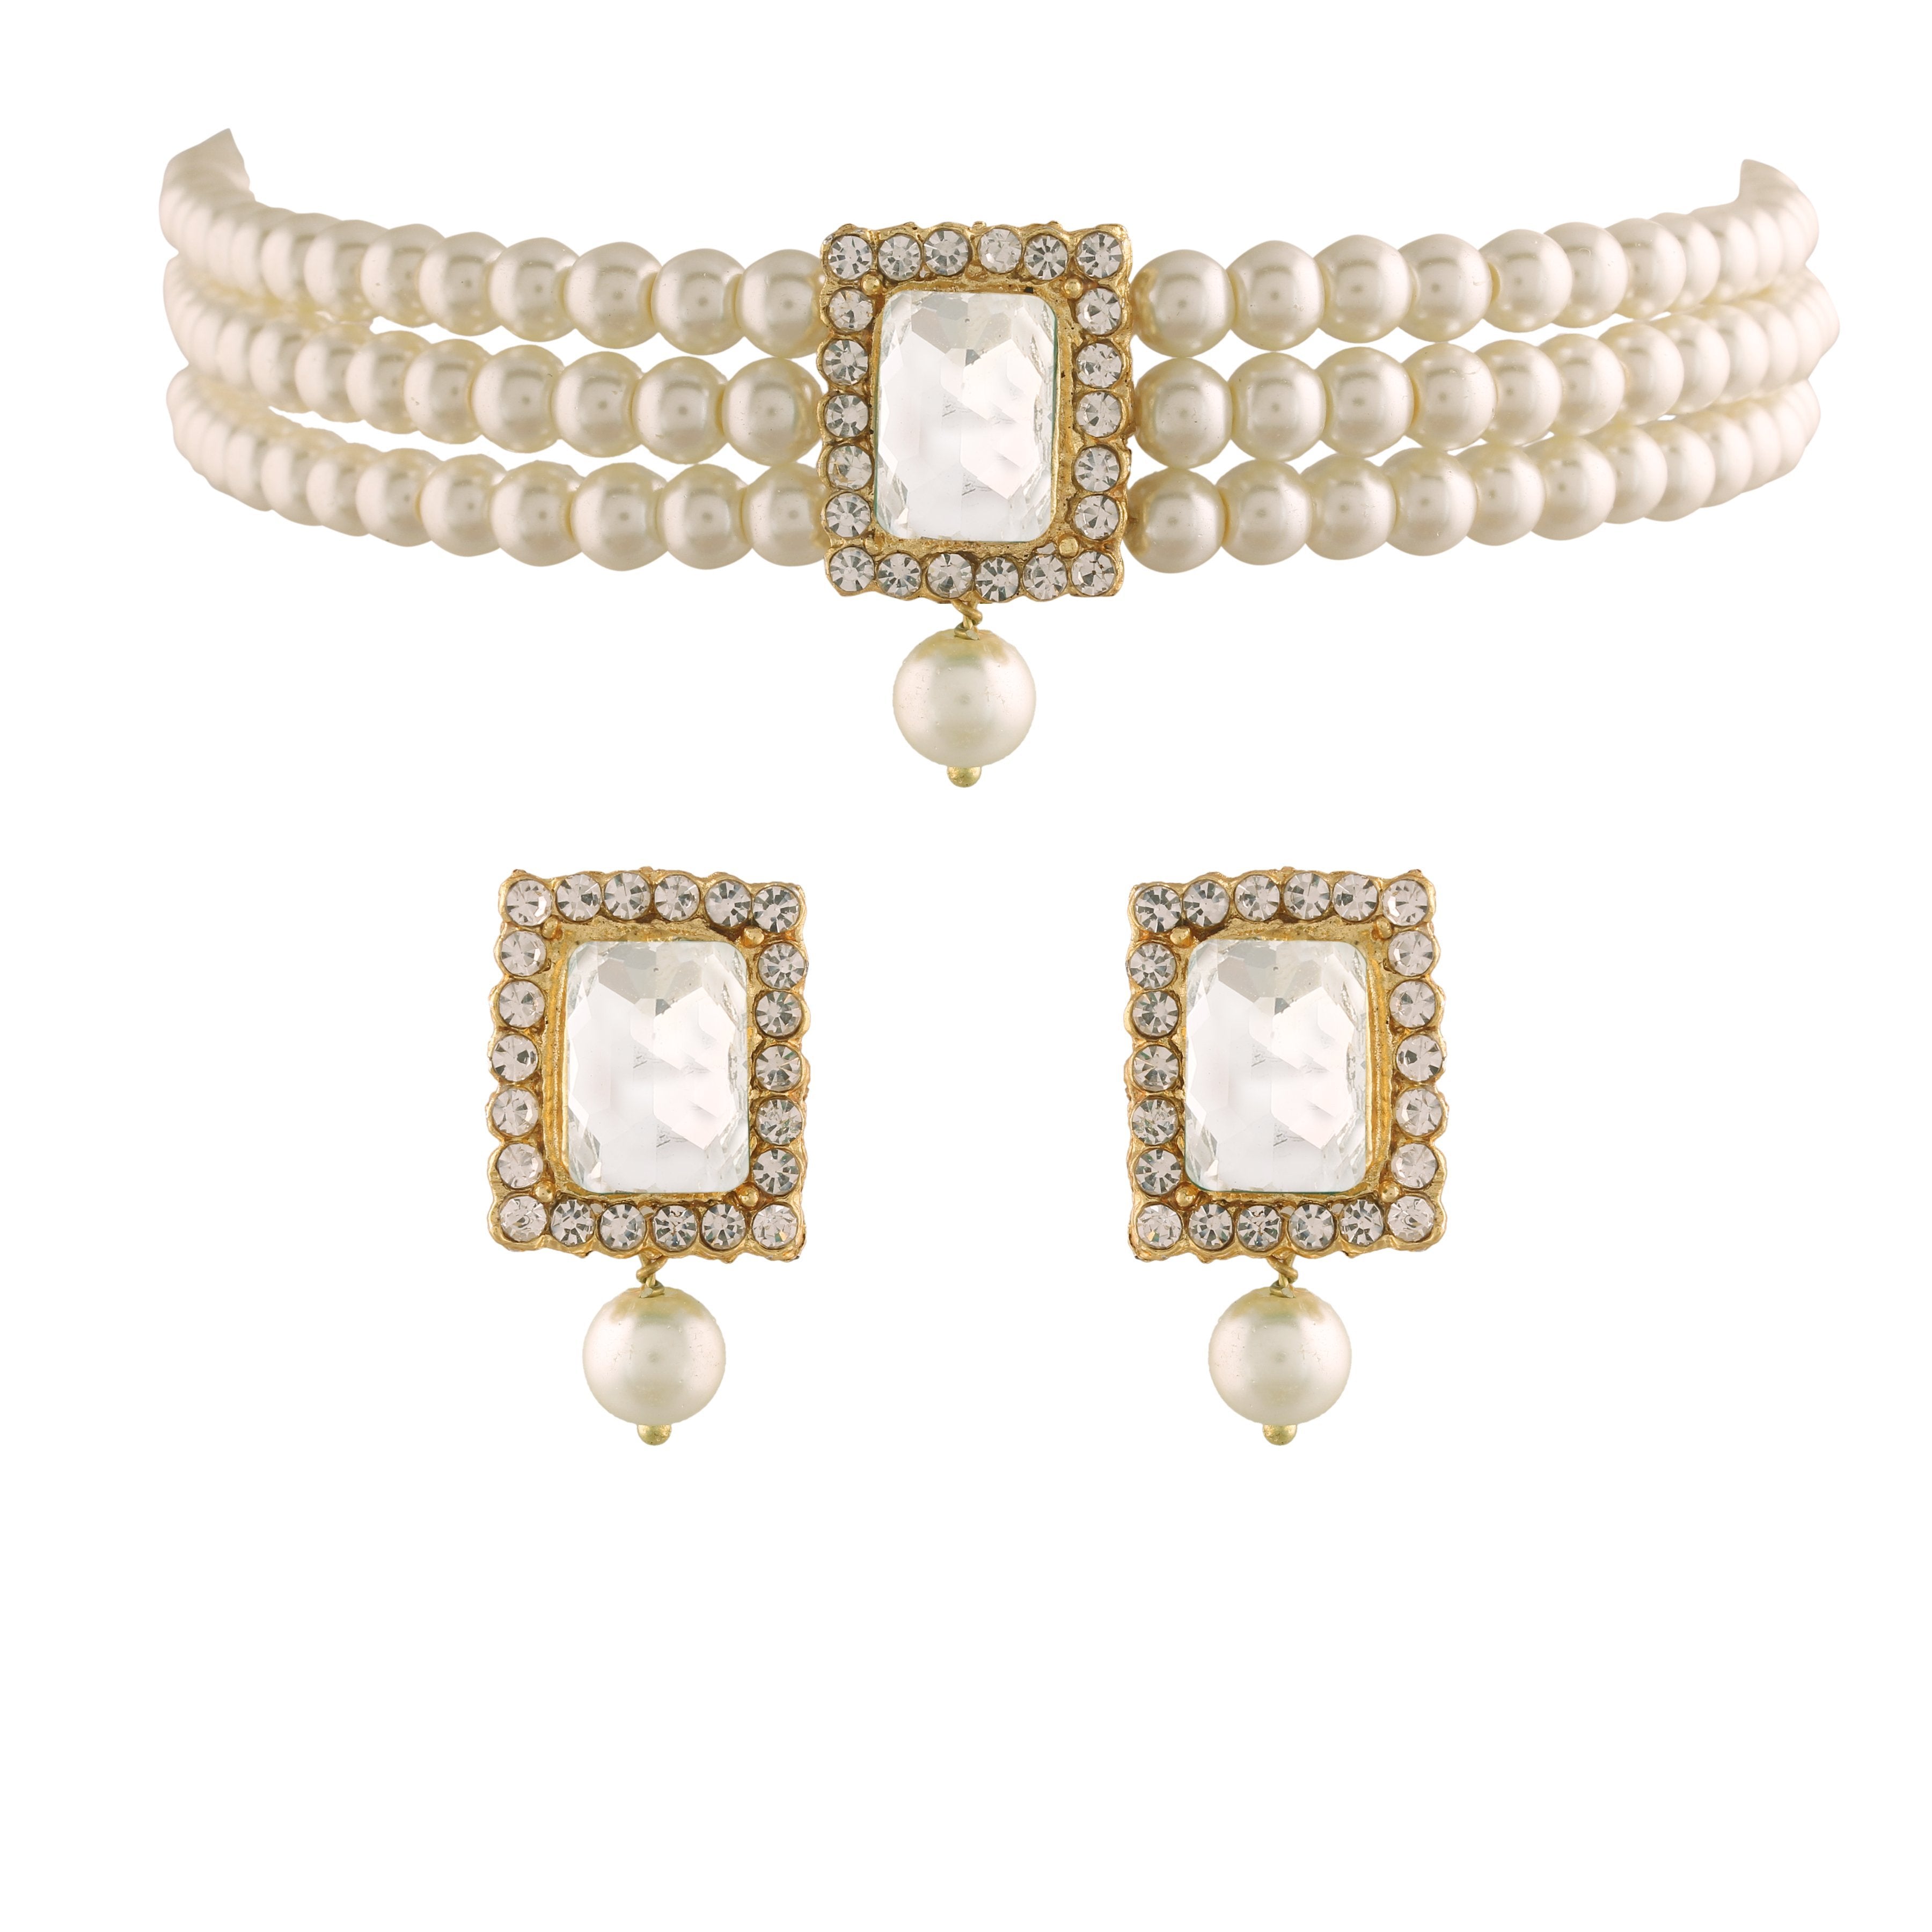 Women's  Gold Plated Traditional Handcrafted White Stone Studded Pearl Choker Necklace Jewellery Set With Earrings - i jewels